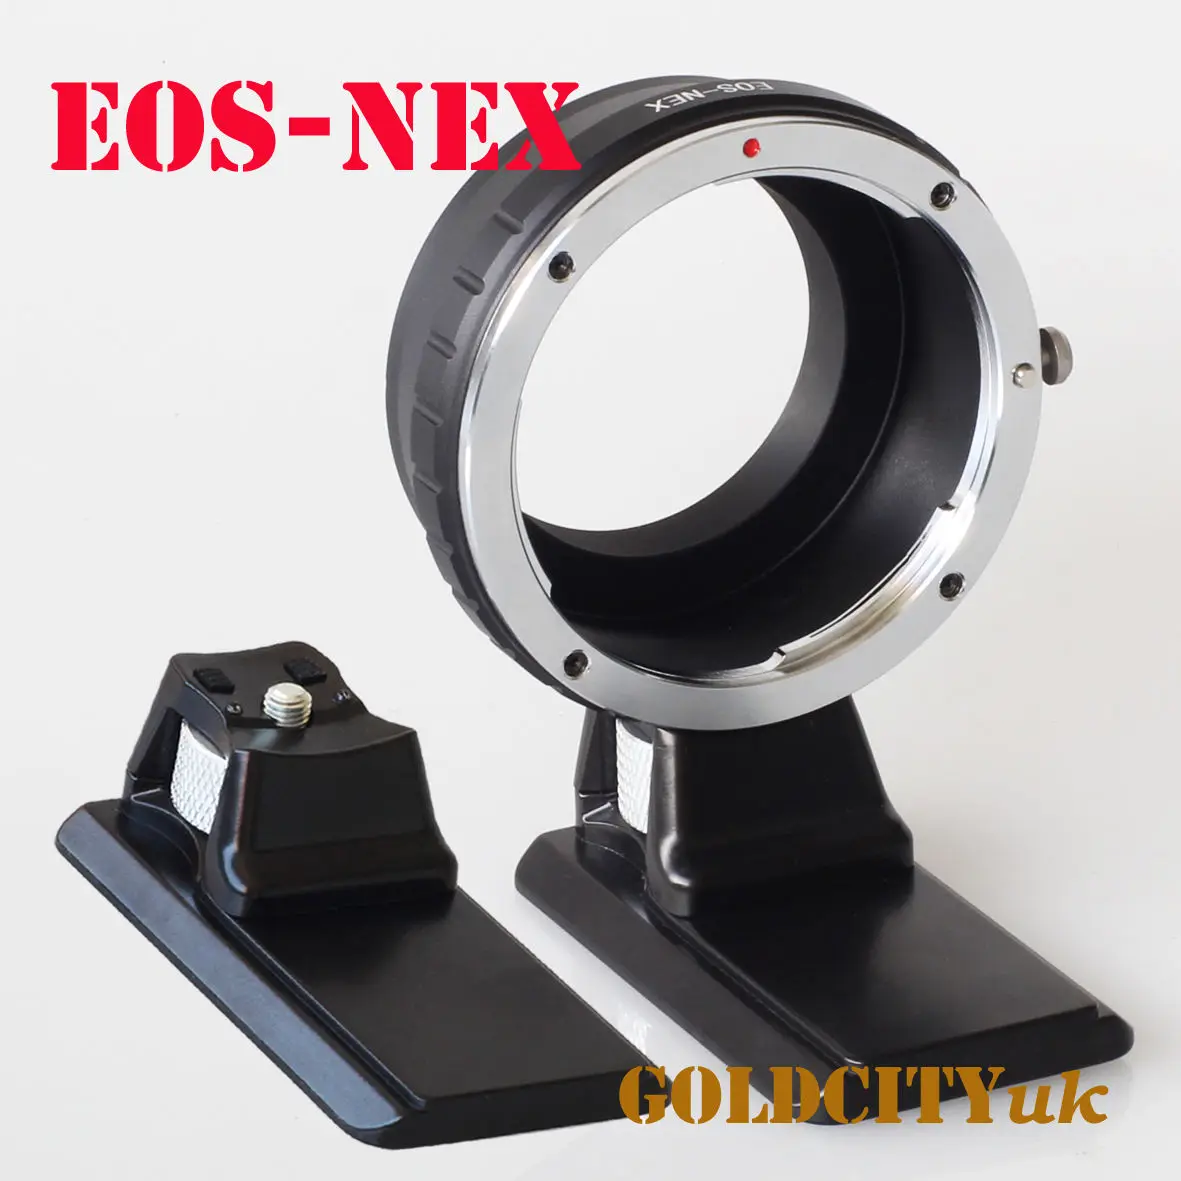 

adapter ring for canon ef efs eos Lens To sony E mount nex NEX-3/5/6/7 A7 A7r a7r2 a7r3 a7r4 a9 A7s A6300 A6000 camera